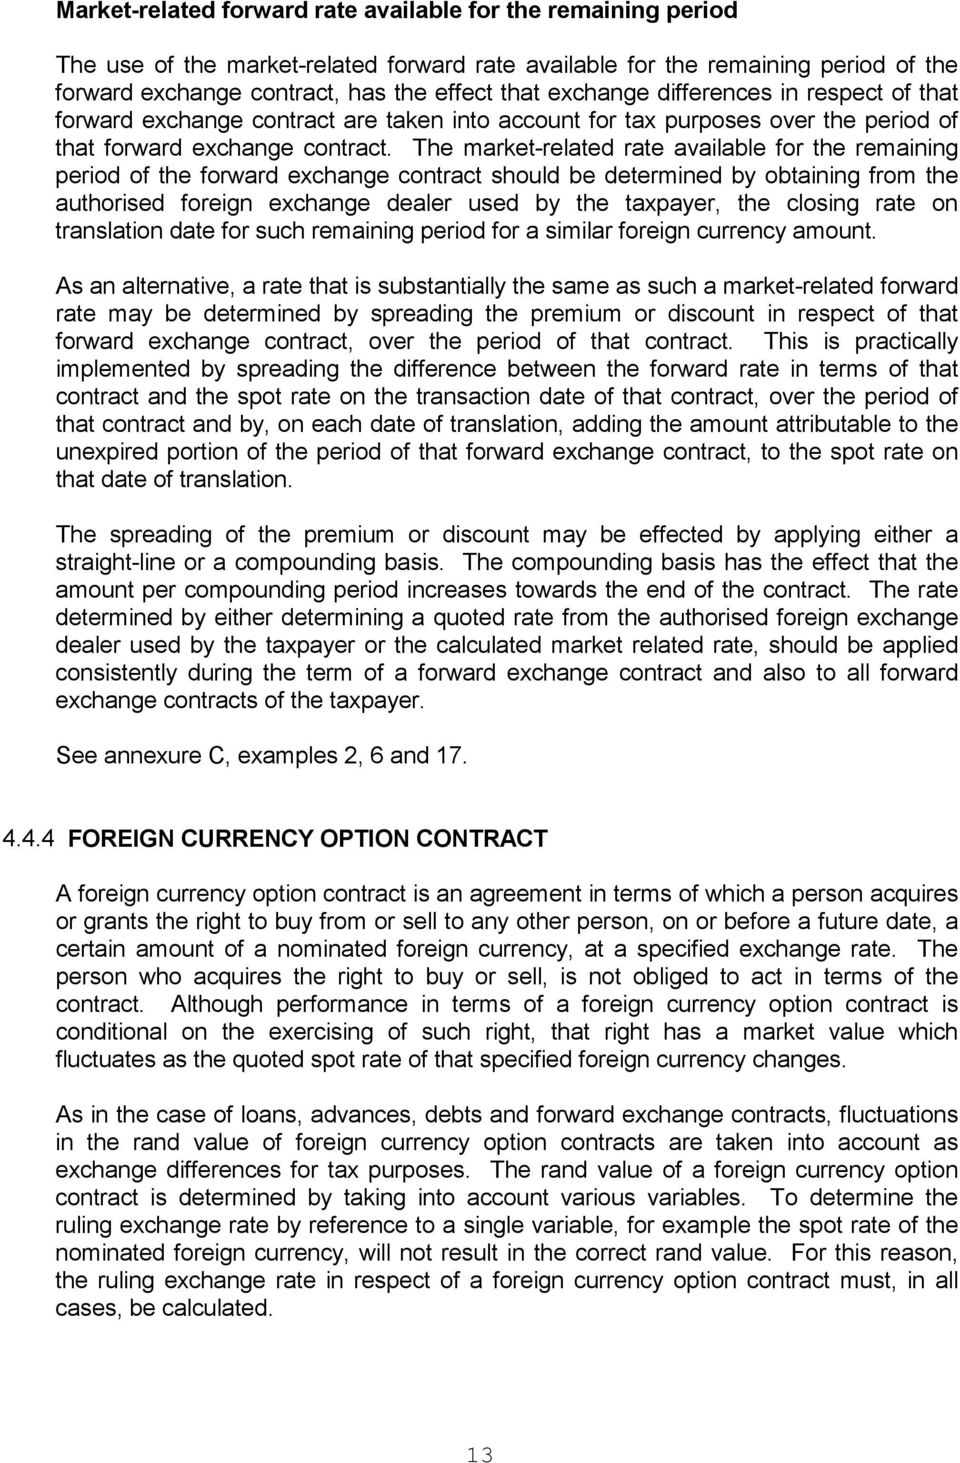 The market-related rate available for the remaining period of the forward exchange contract should be determined by obtaining from the authorised foreign exchange dealer used by the taxpayer, the